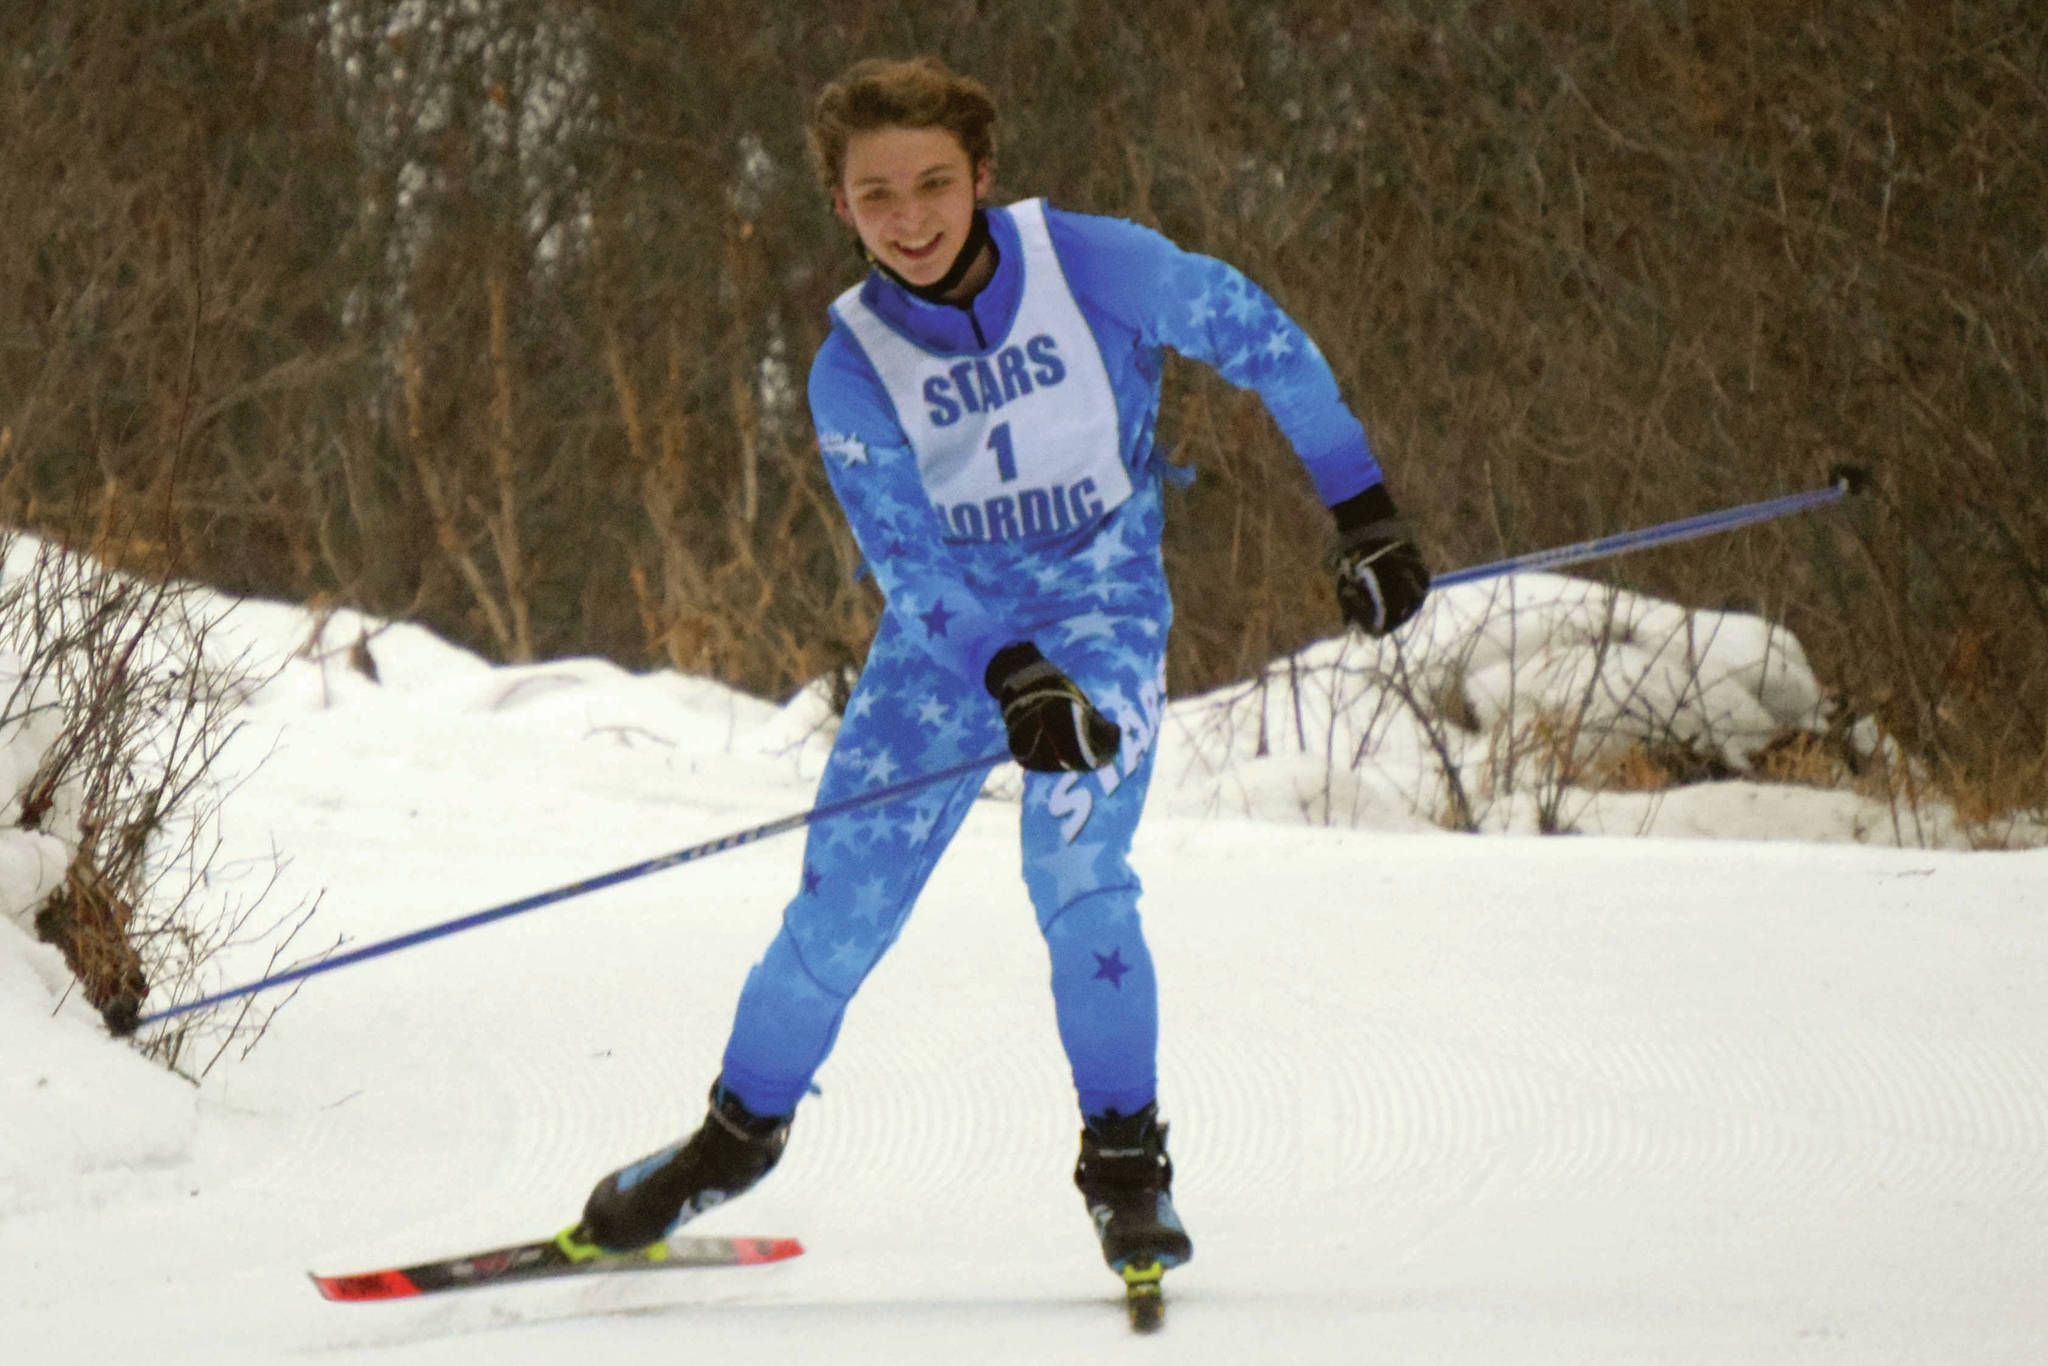 Soldotna's Quinn Cox gets first tracks as he skis to second place in the Soldotna Invite on Saturday, Jan. 23, 2021, at Tsalteshi Trails just outside of Soldotna, Alaska. (Photo by Jeff Helminiak/Peninsula Clarion)